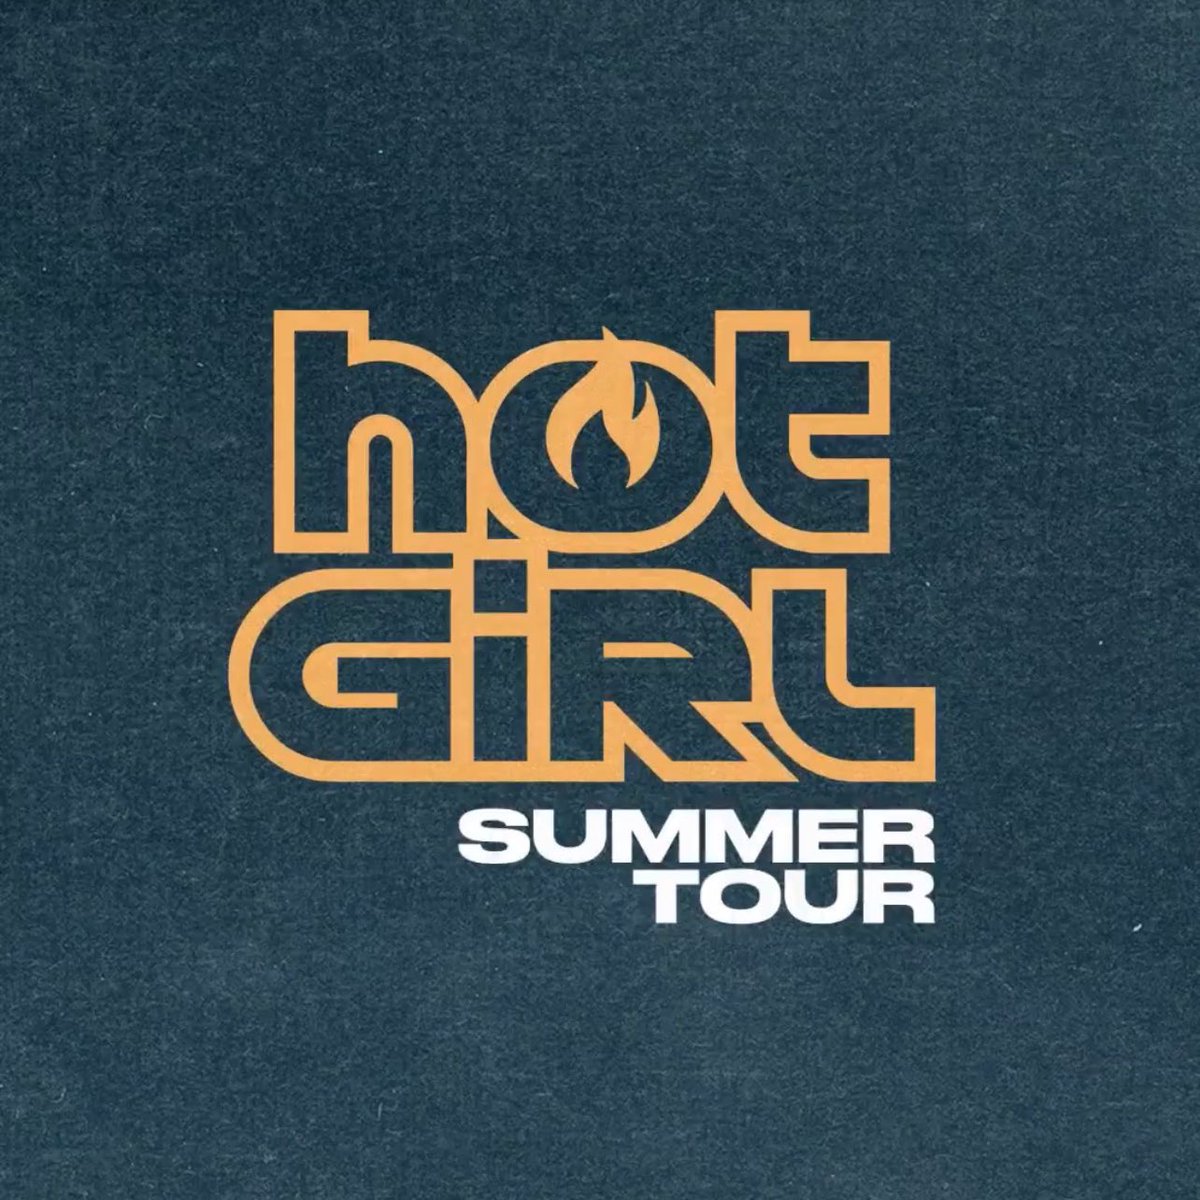 Megan Thee Stallion will officially kick off her Hot Girl Summer Tour tomorrow in Minneapolis, MN with special guest GloRilla.